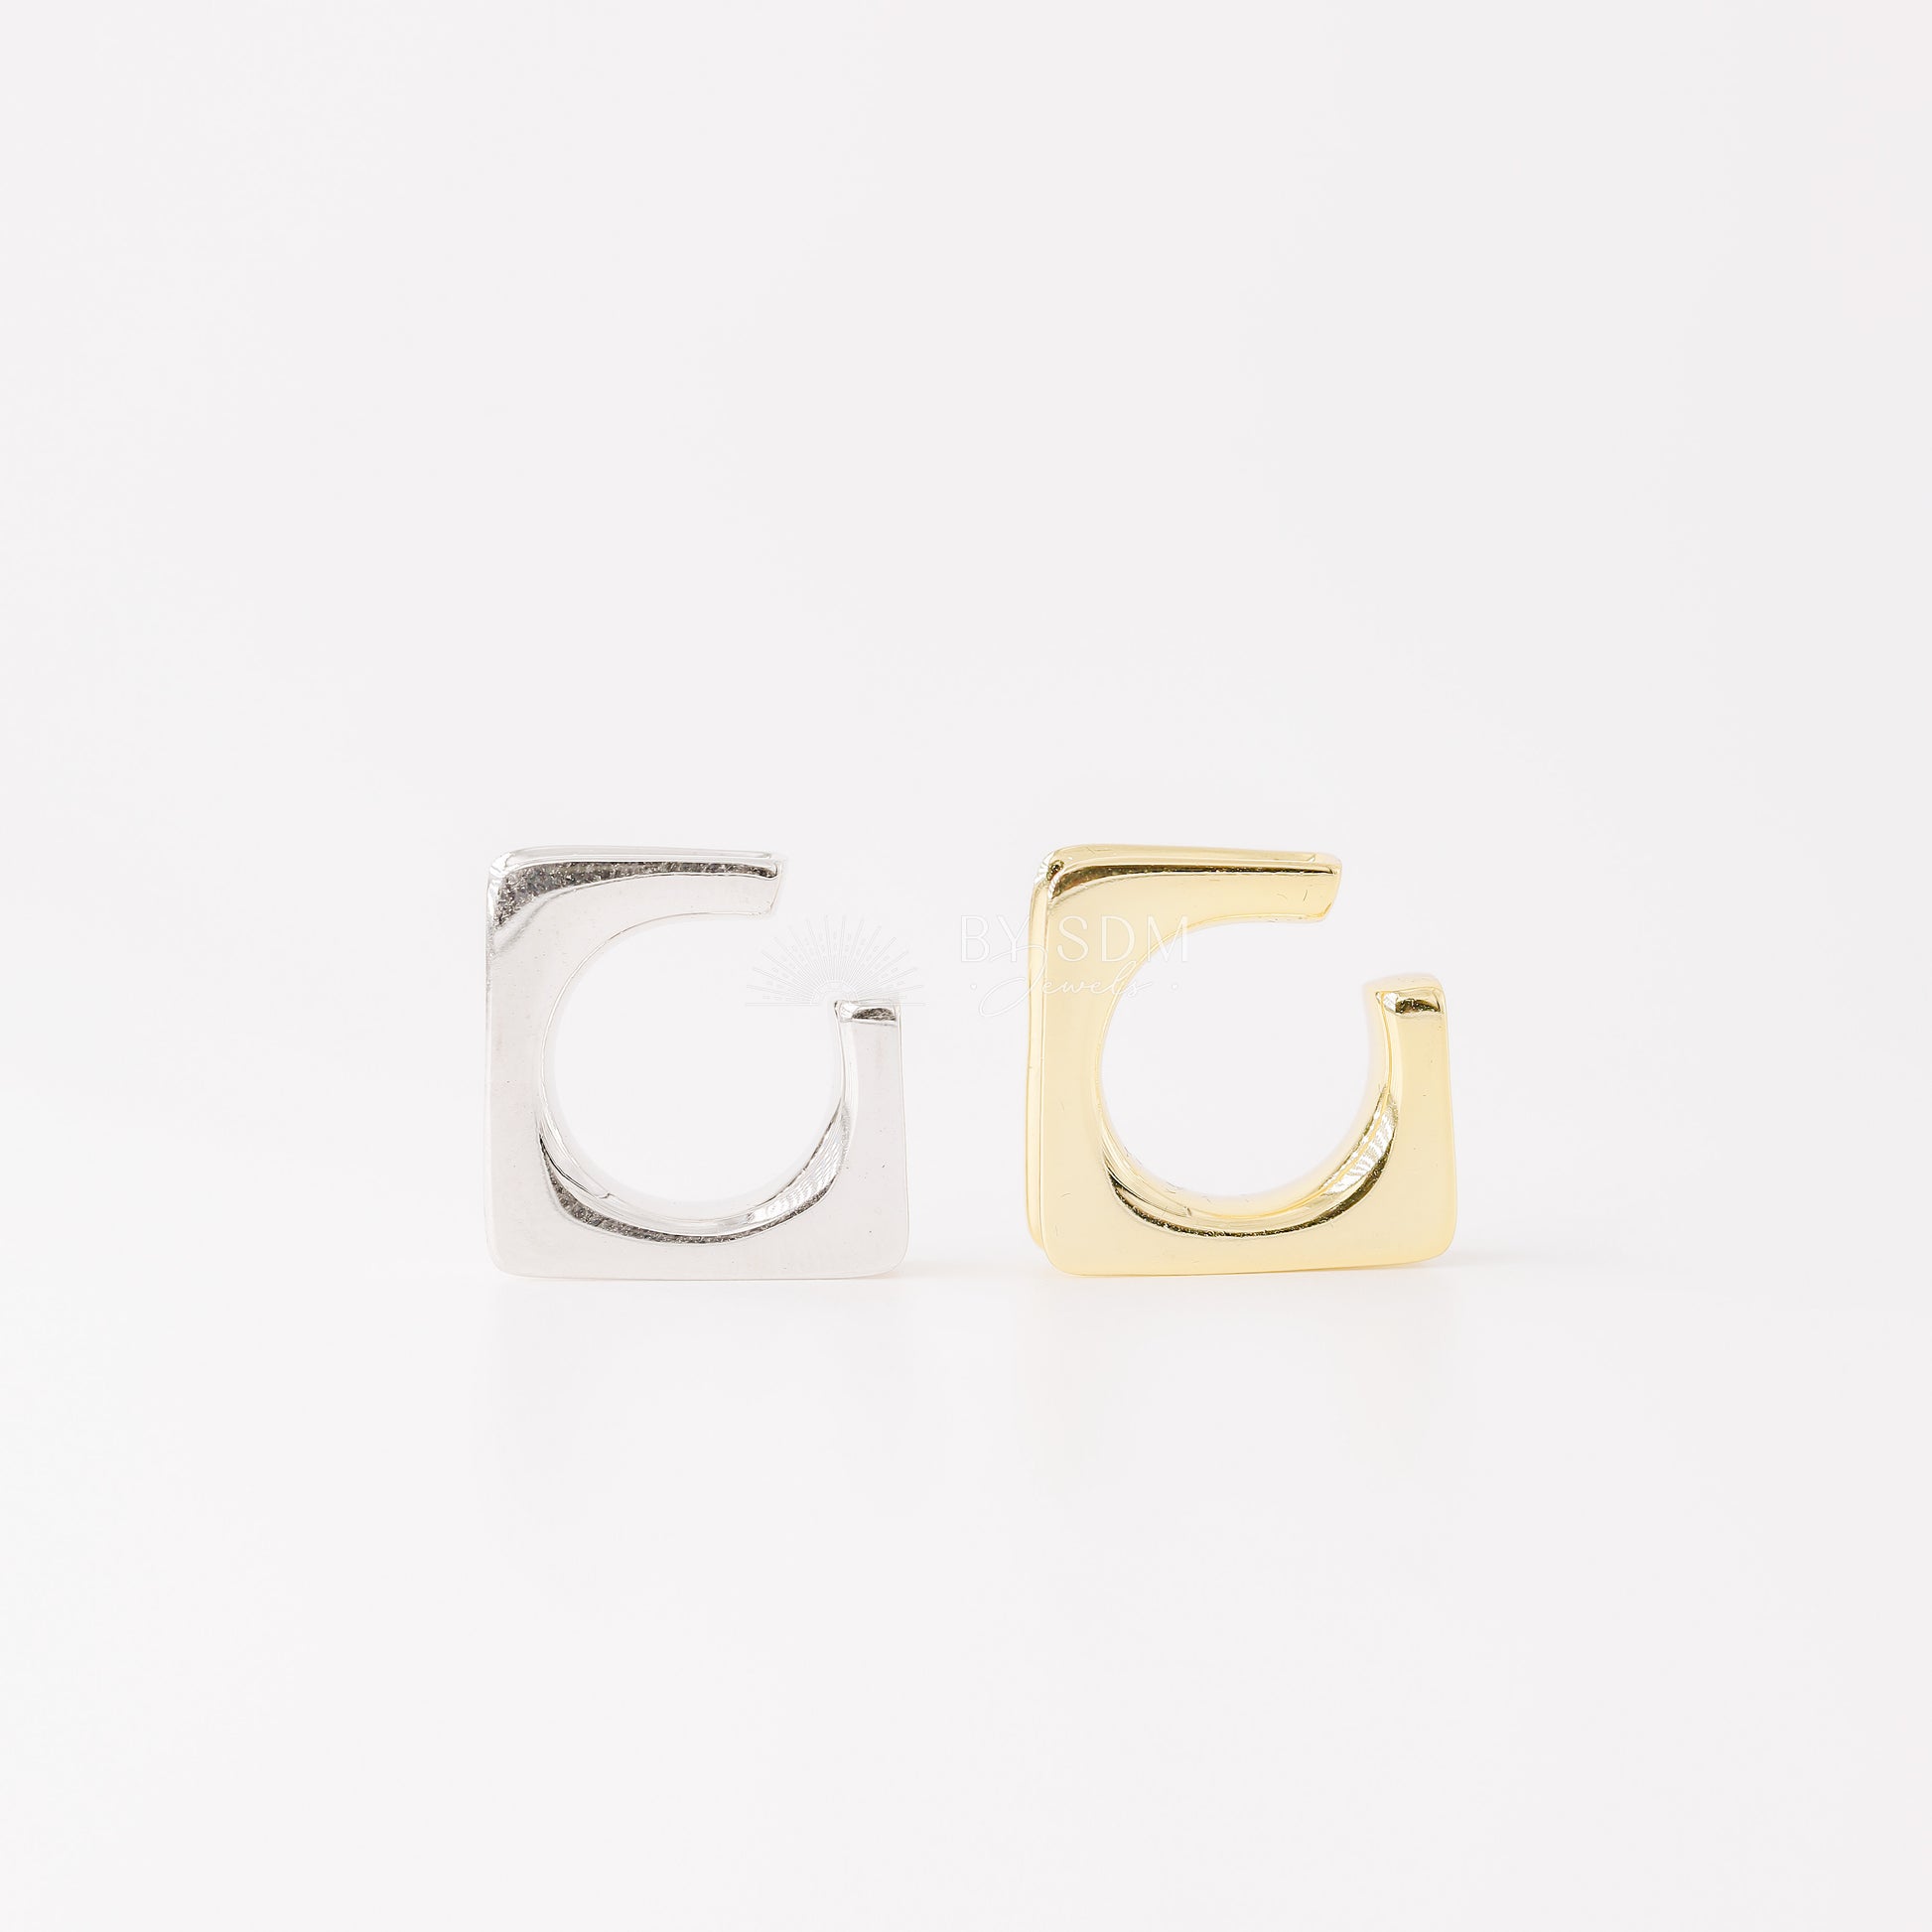 Square Large Band Ear Cuff • No Piercing is Needed • Gold, Silver